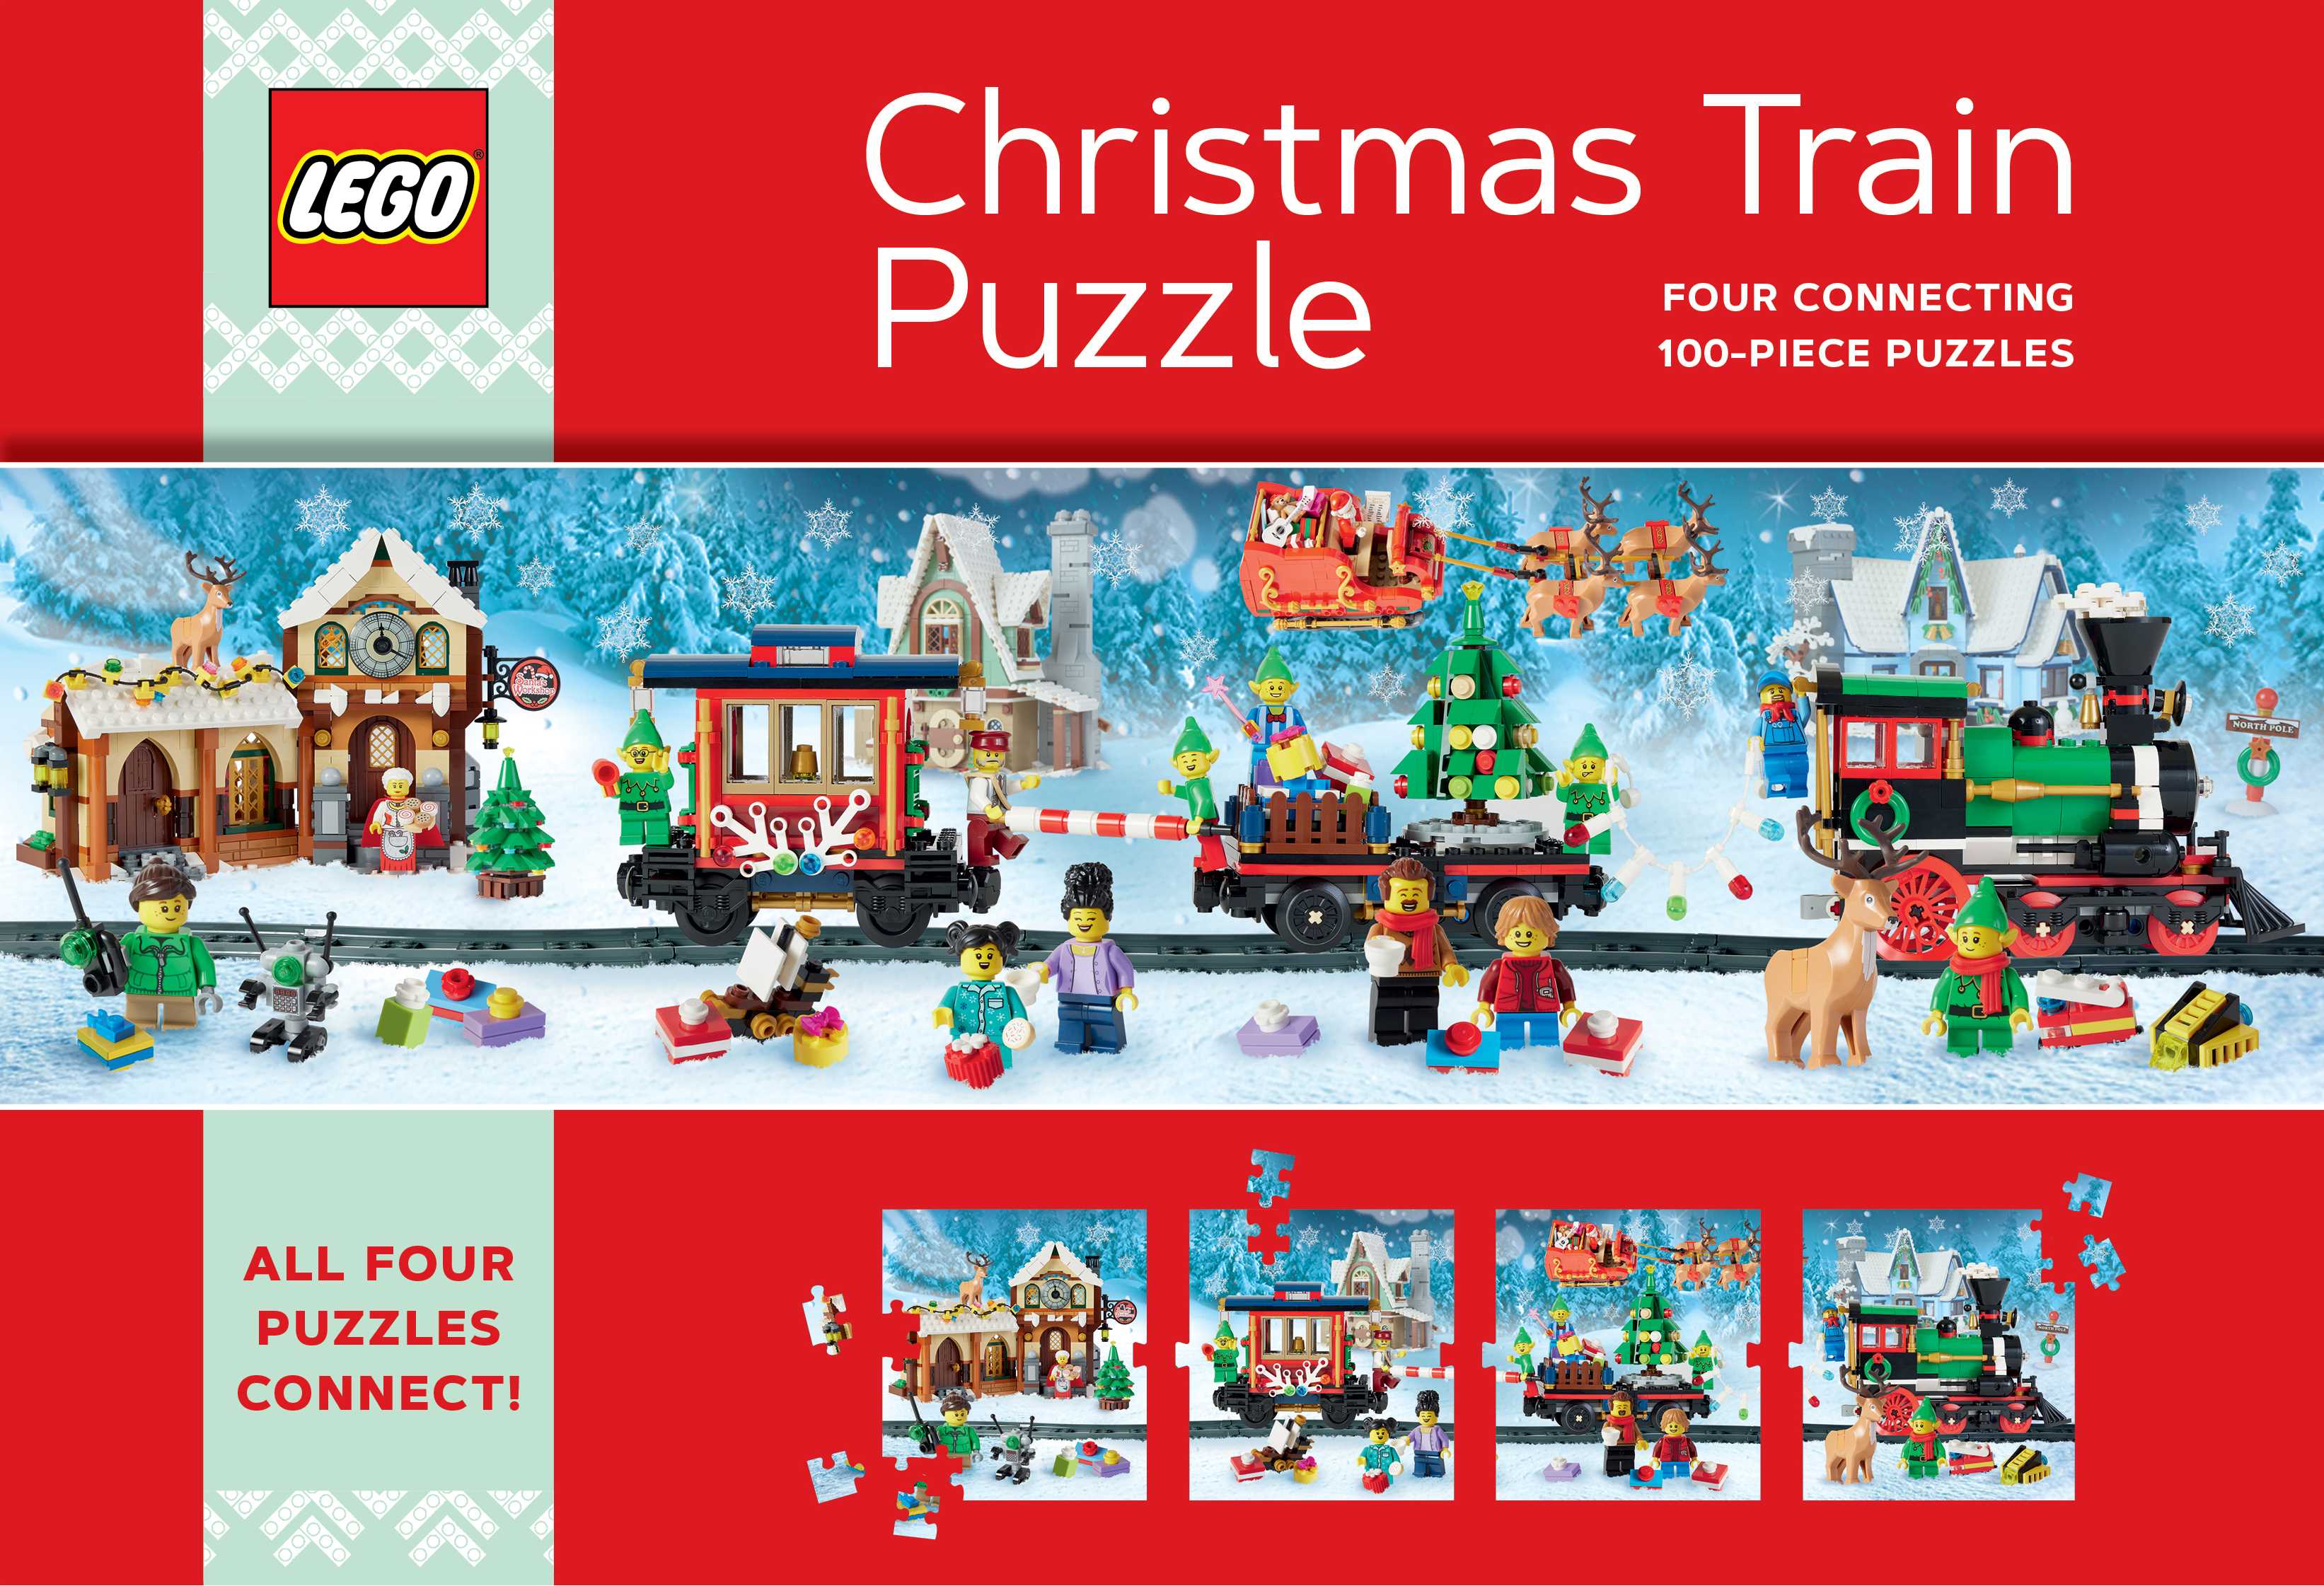 LEGO Christmas Train Puzzle (4 Connecting 100-Piece Puzzles)